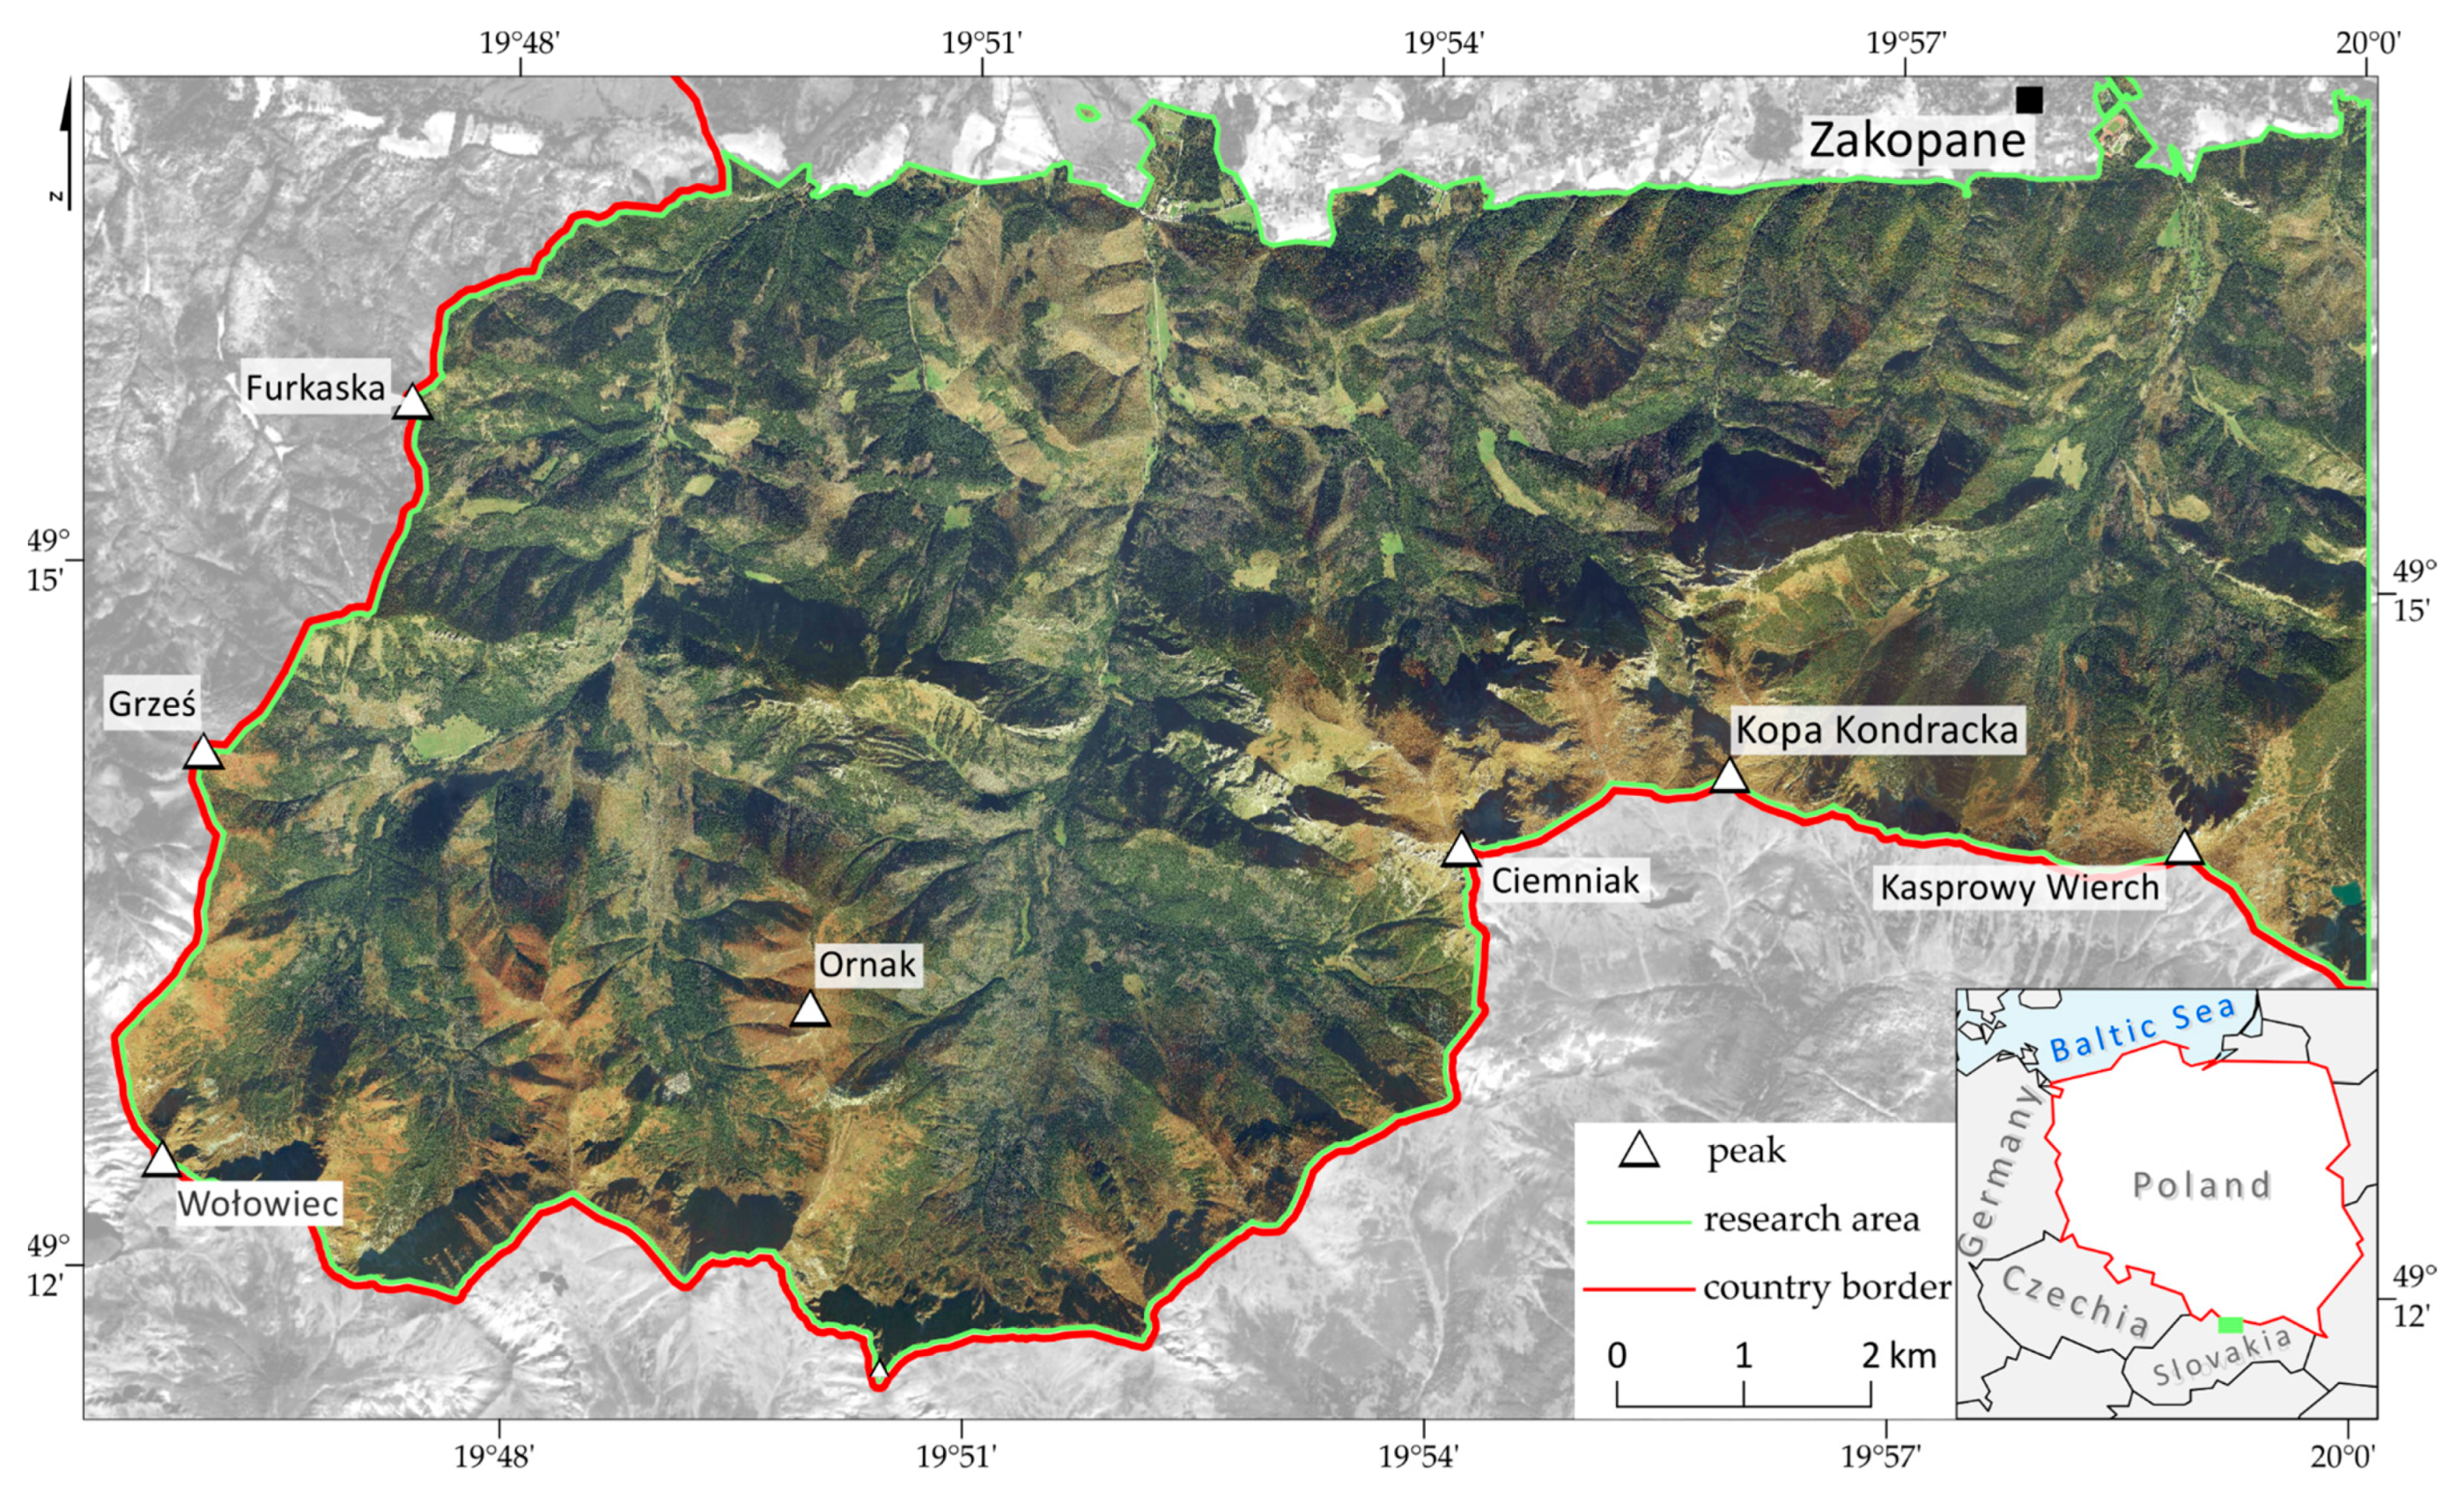 Remote Sensing | Free Full-Text | Airborne HySpex Hyperspectral Versus  Multitemporal Sentinel-2 Images for Mountain Plant Communities Mapping